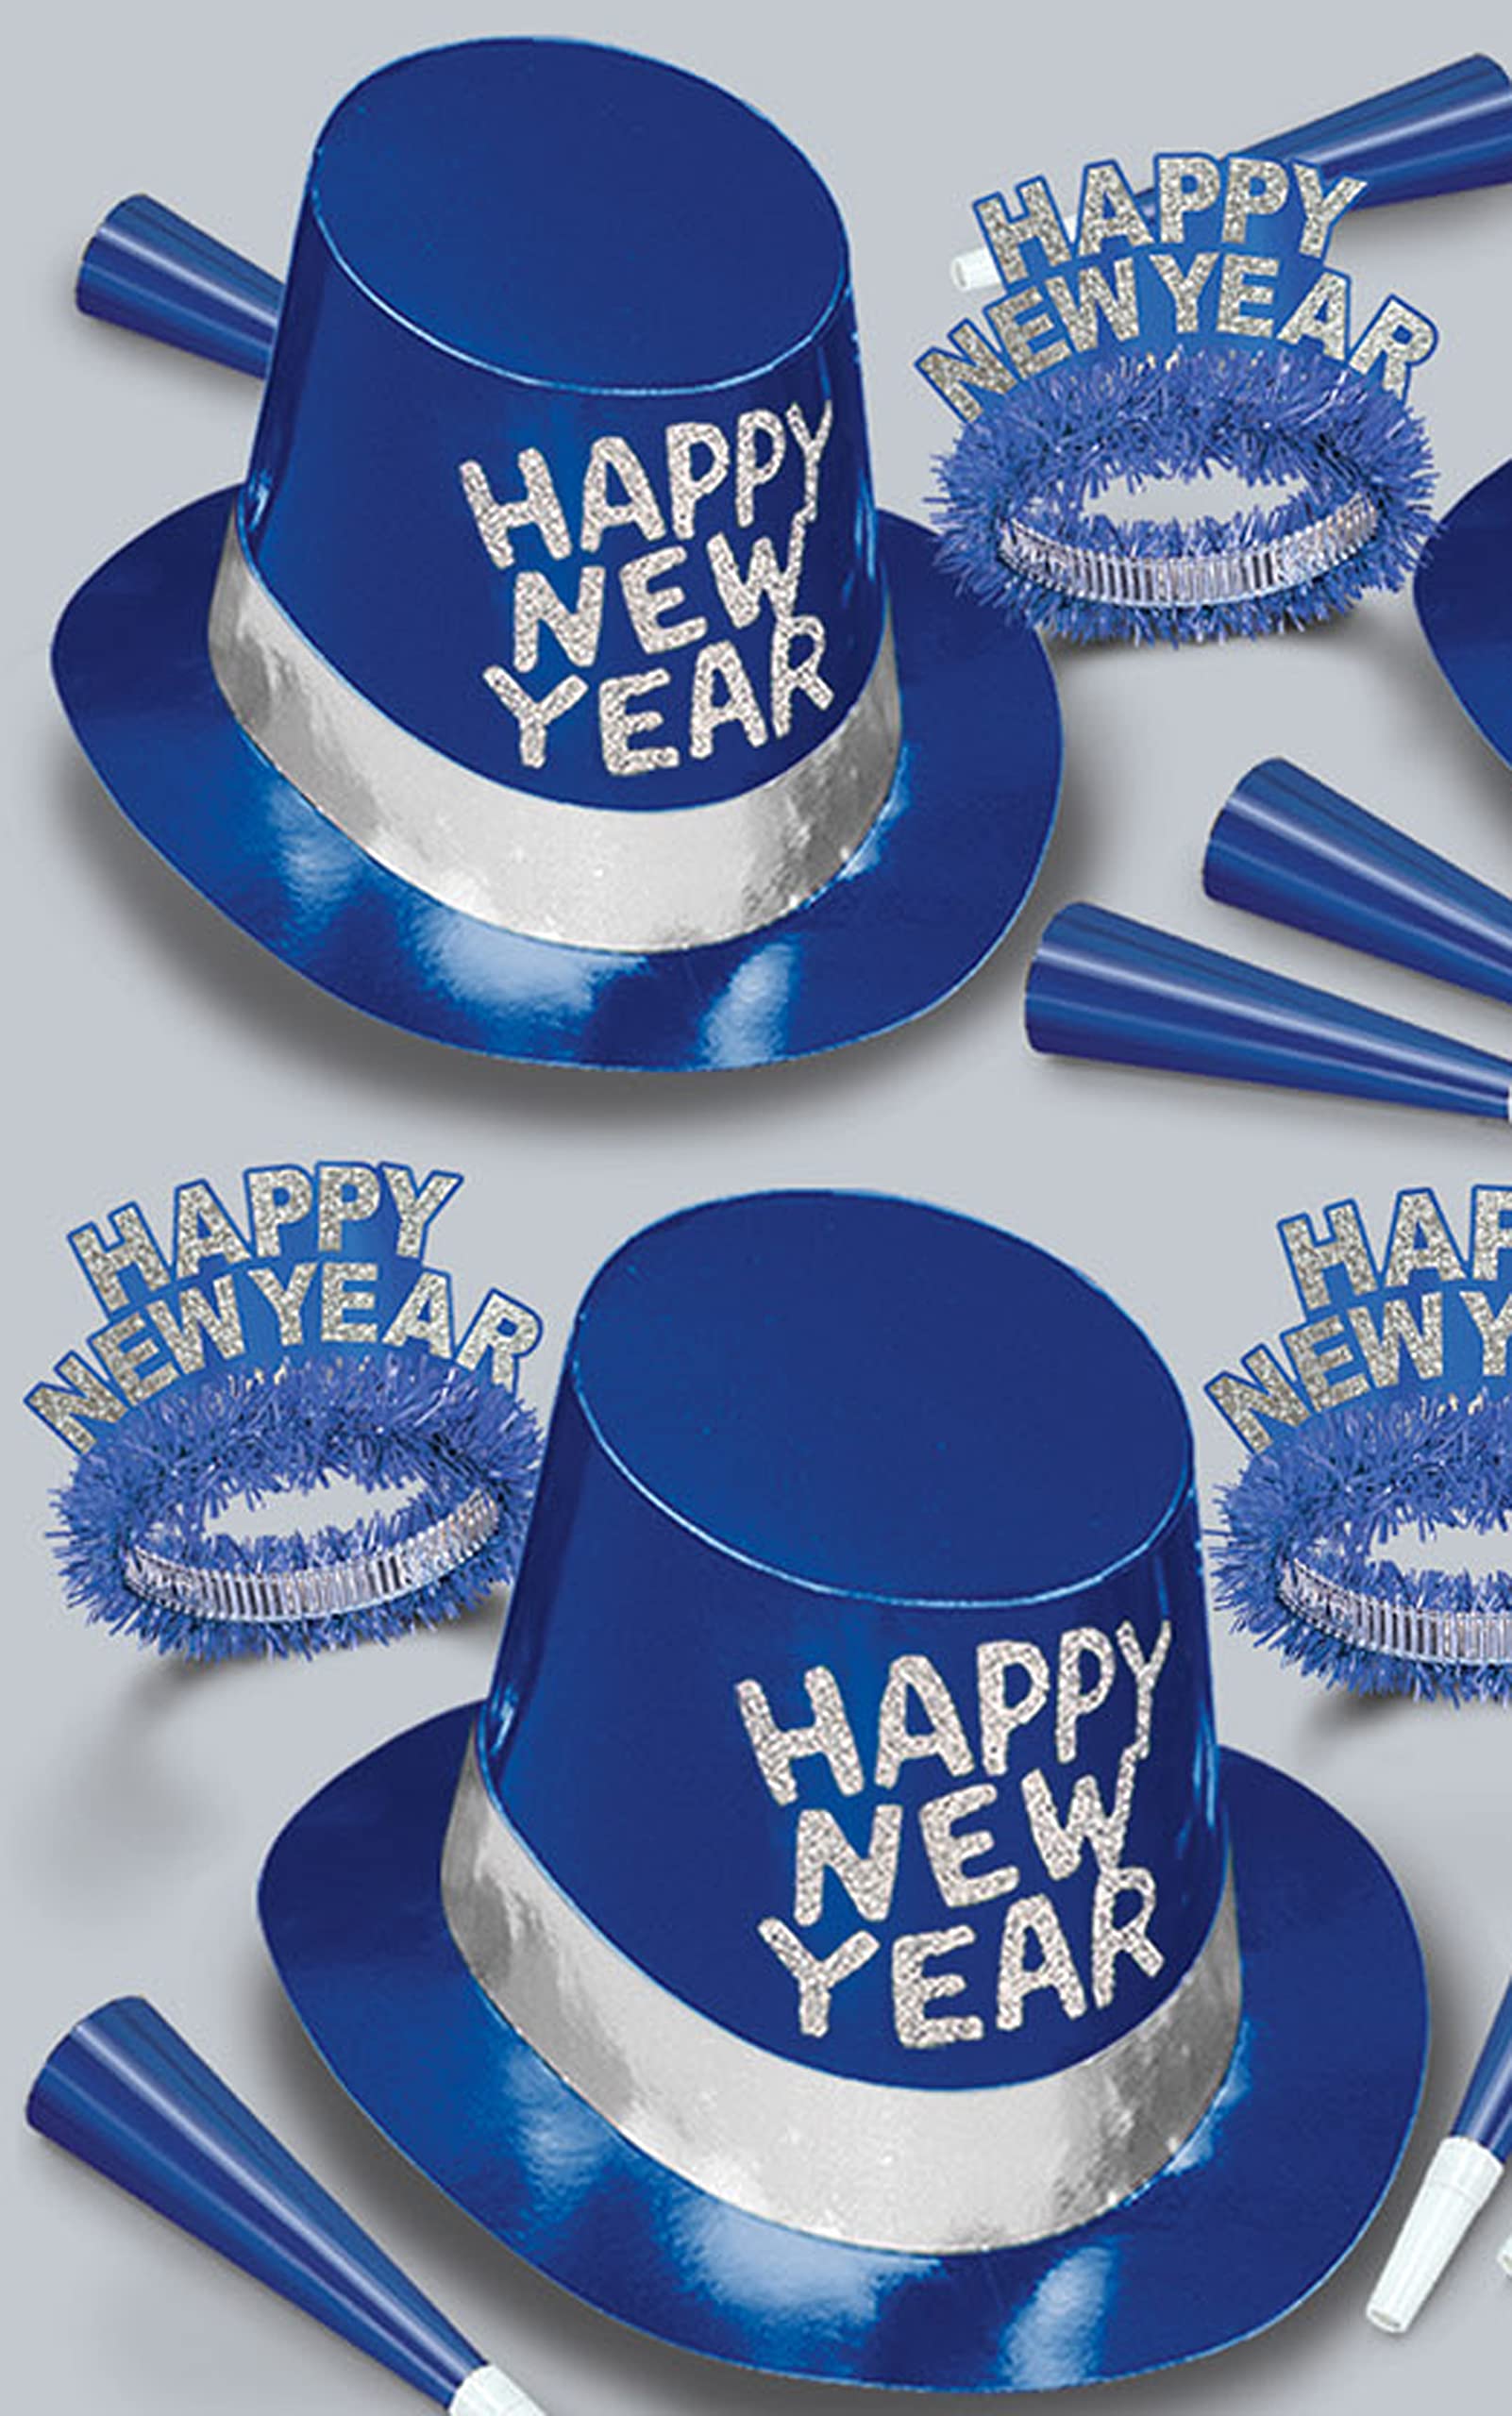 Beistle Ice Assortment for 50 People – New Years Eve Party Favors Supplies – Hats, Tiaras, Noisemaker Horns, One Size, Blue/Silver